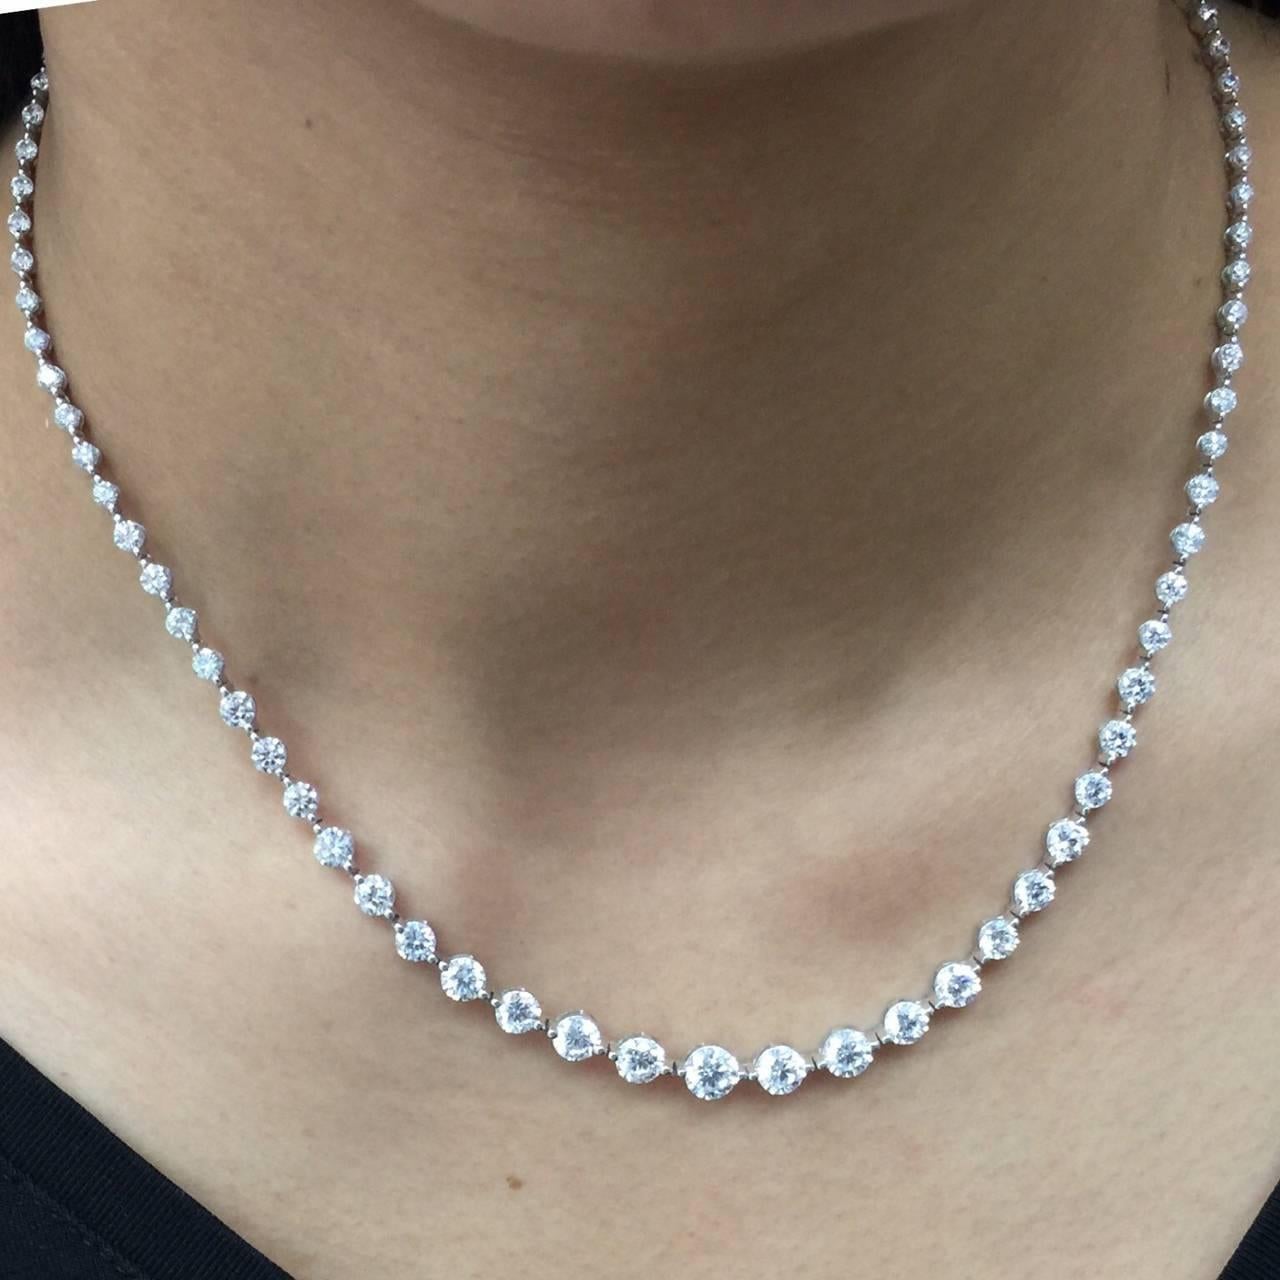 Approx total weight: 11.00cts
Diamond Color: E-F
Diamond Clarity: Vs 
Cut: Excellent 
Do you want to see the diamonds without any metal? Emilio! has created our unique trademark designed necklace as if the diamonds are floating. There is no metal